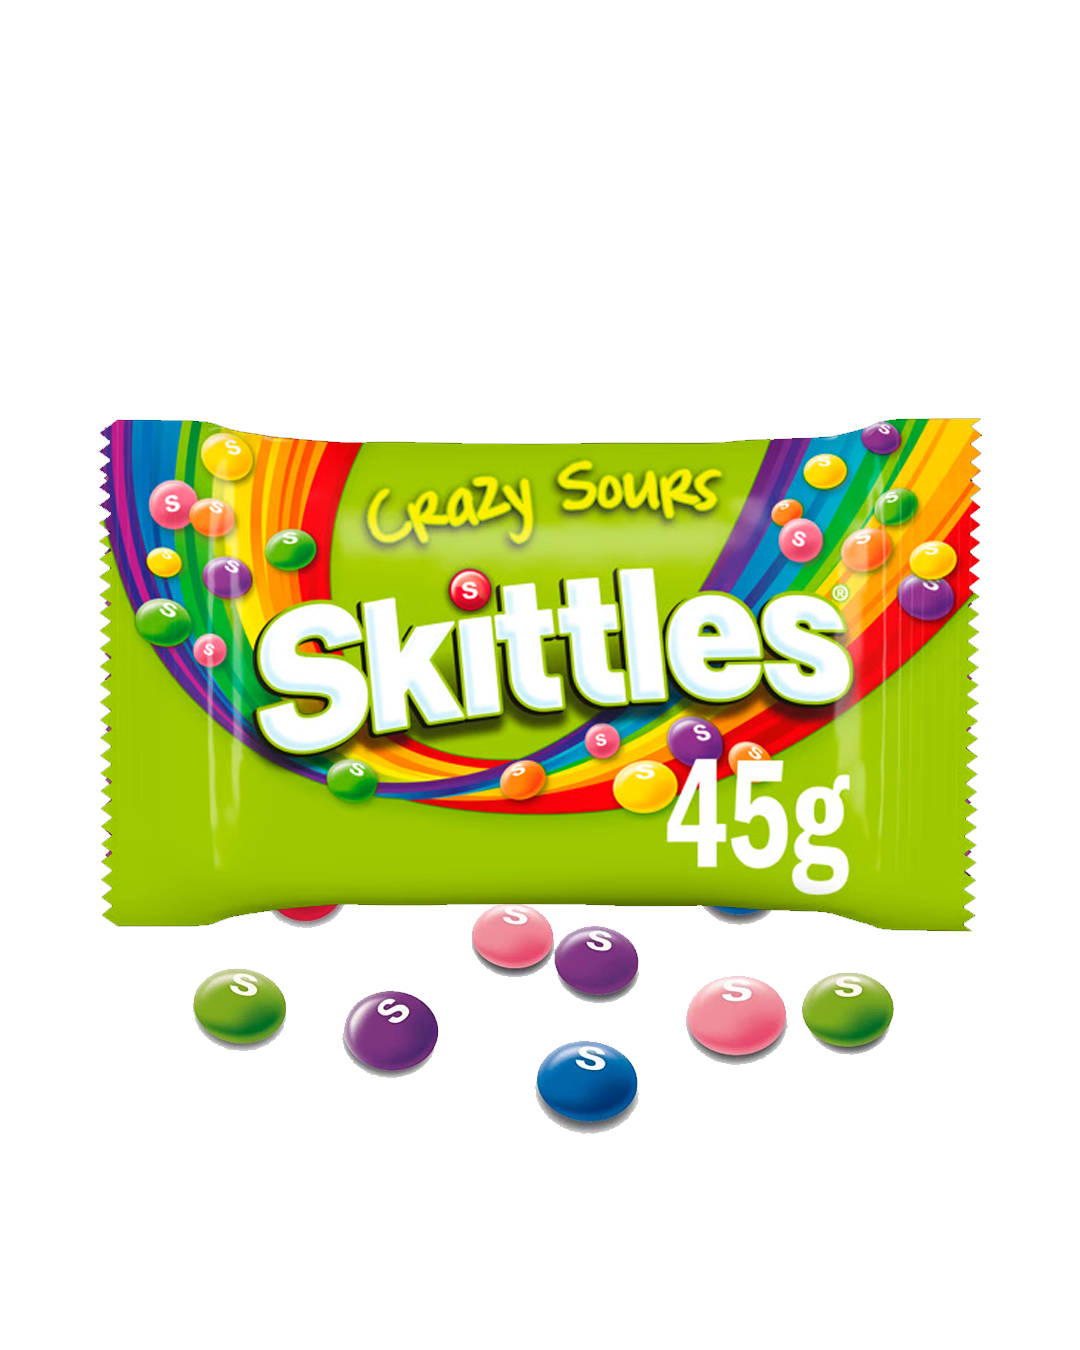 SKITTLES_Crazy_Sours_Sweets_55g